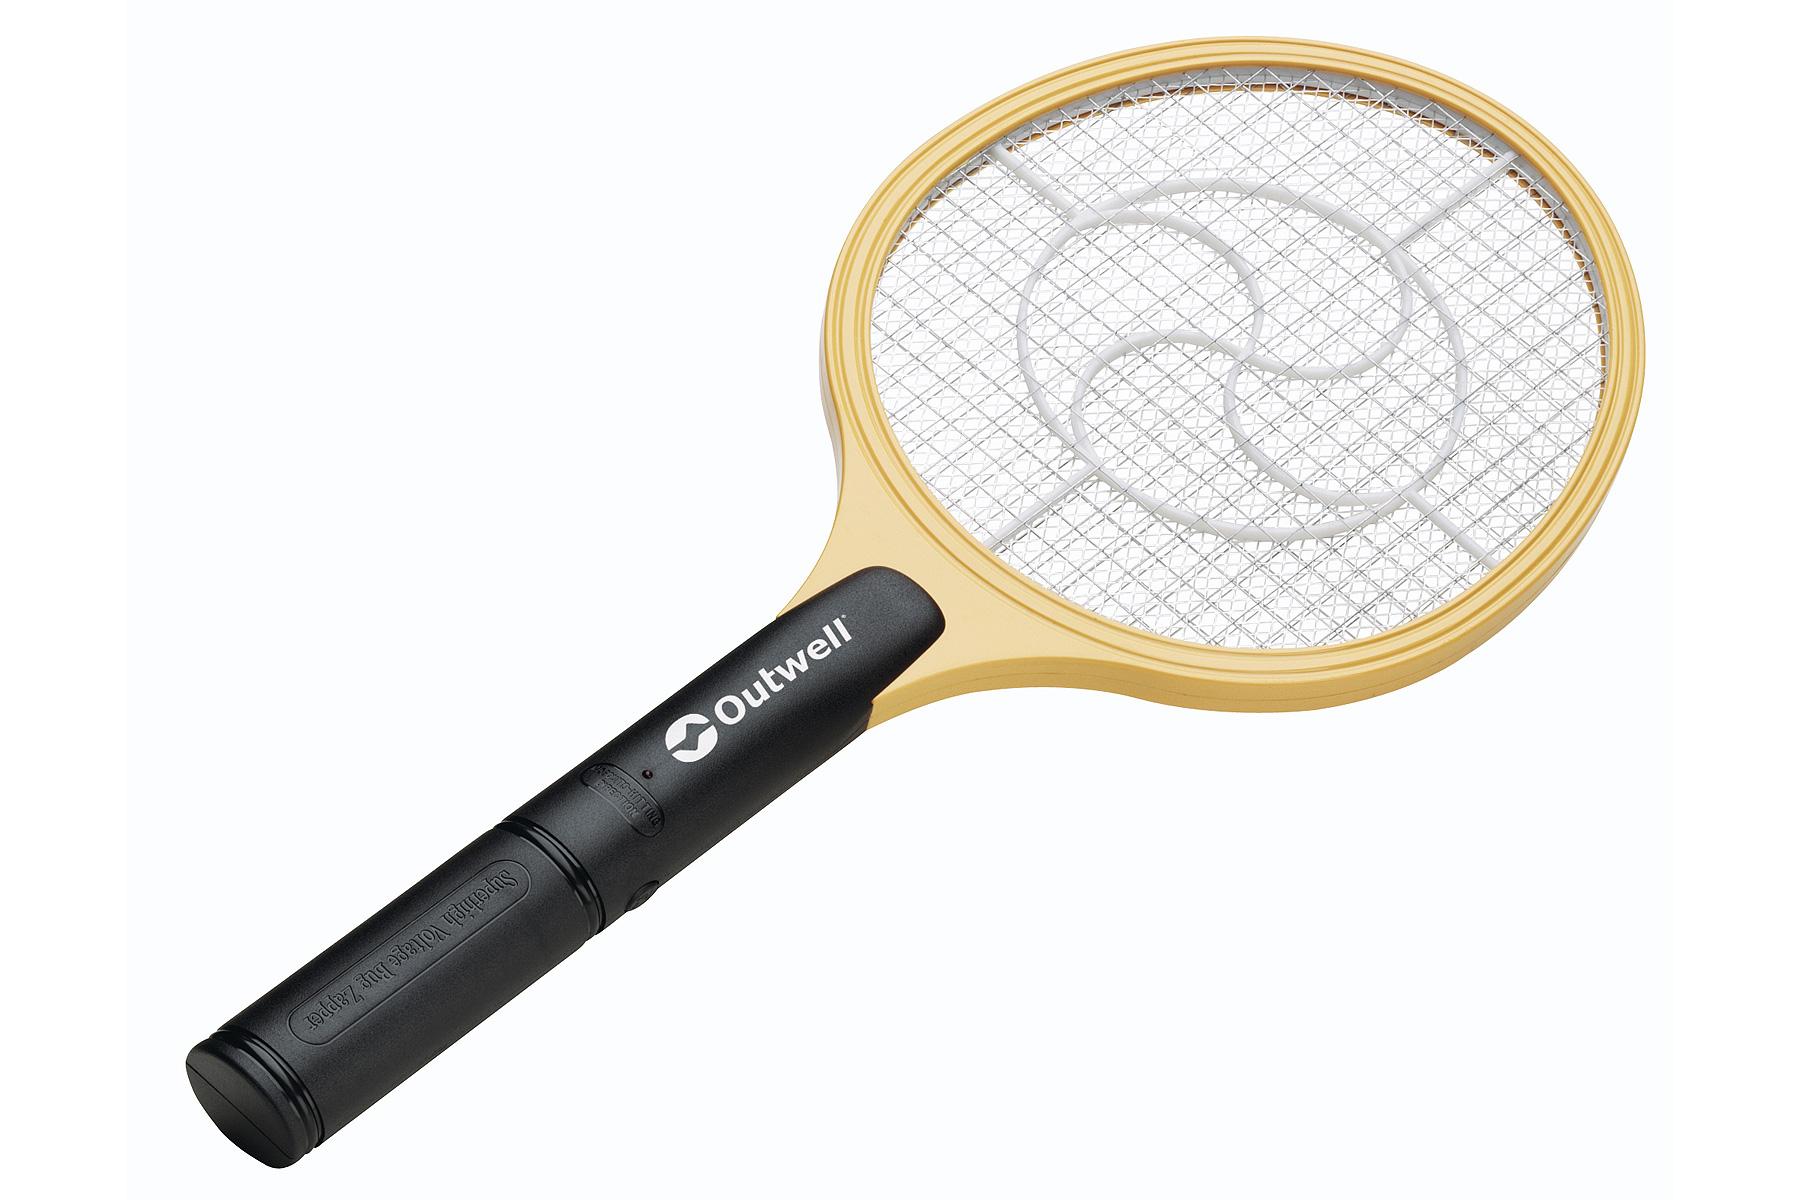 Foto Outwell Mosquito Hitting Swatter Protección contra insectos foto 356726